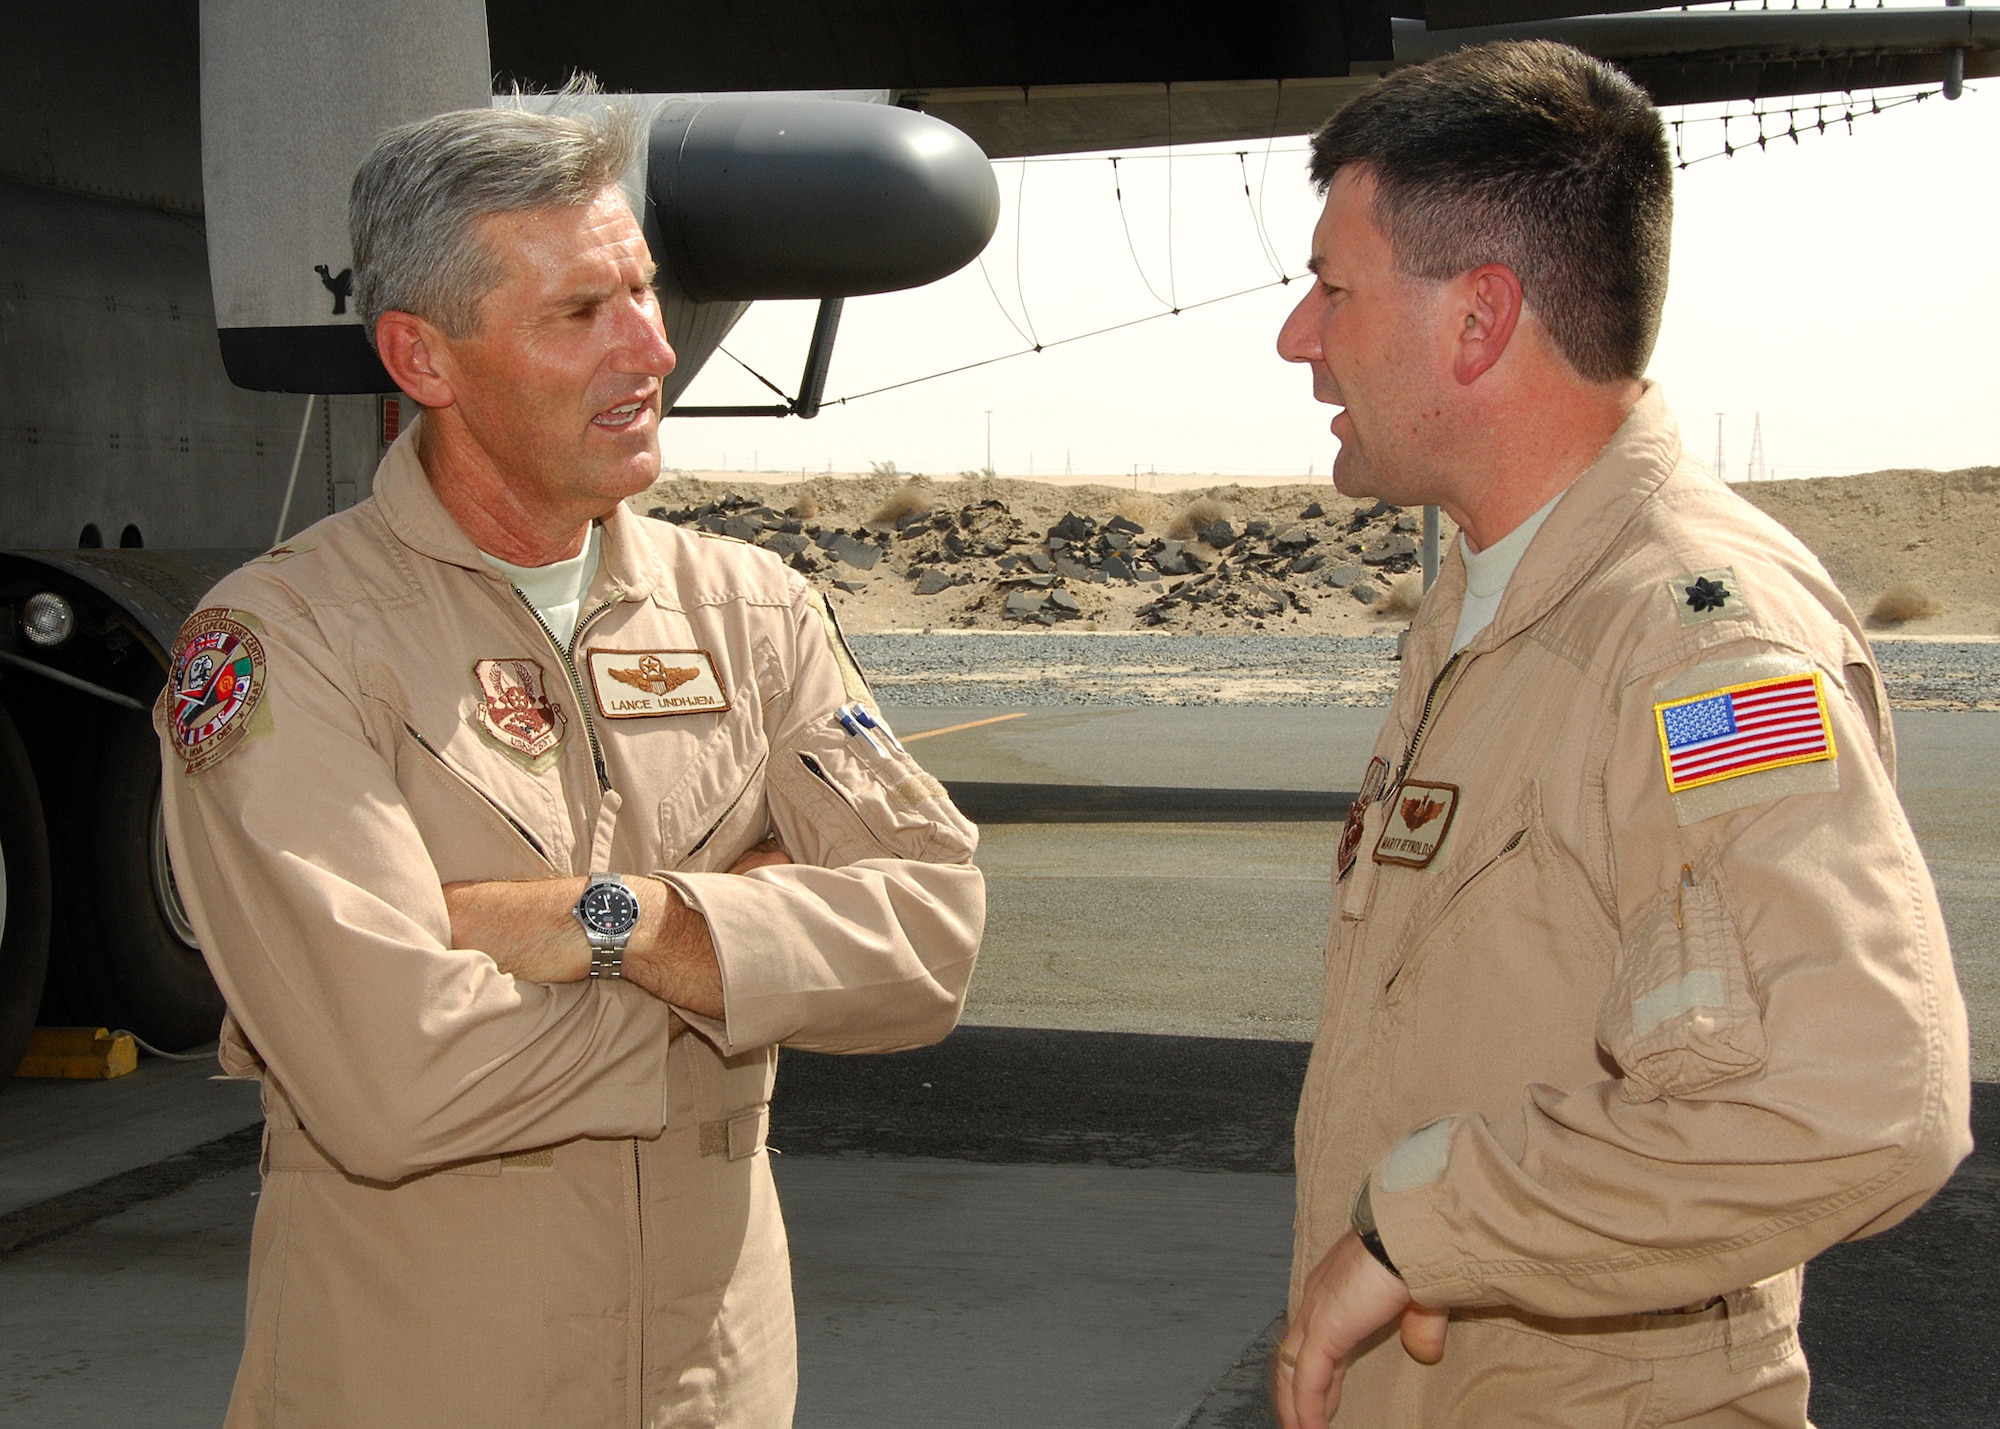 SOUTHWEST ASIA -- Brig. Gen. Lance Undjem, Combined Air and Space Operations Center director, talks with Lt. Col. Marty Reynolds, 43rd Expeditionary Electronic Combat Squadron, about the capabilities of the EC-130H Compass Call on Aug. 29 at an air base in Southwest Asia. General Undjem is the new CAOC director, and is touring U.S. Central Command observing how the CAOC contributes to day-to-day operations in the theater. Colonel Reynolds is deployed from Davis-Monthan Air Force Base, Ariz. (U.S. Air Force photo/Tech. Sgt. Raheem Moore)